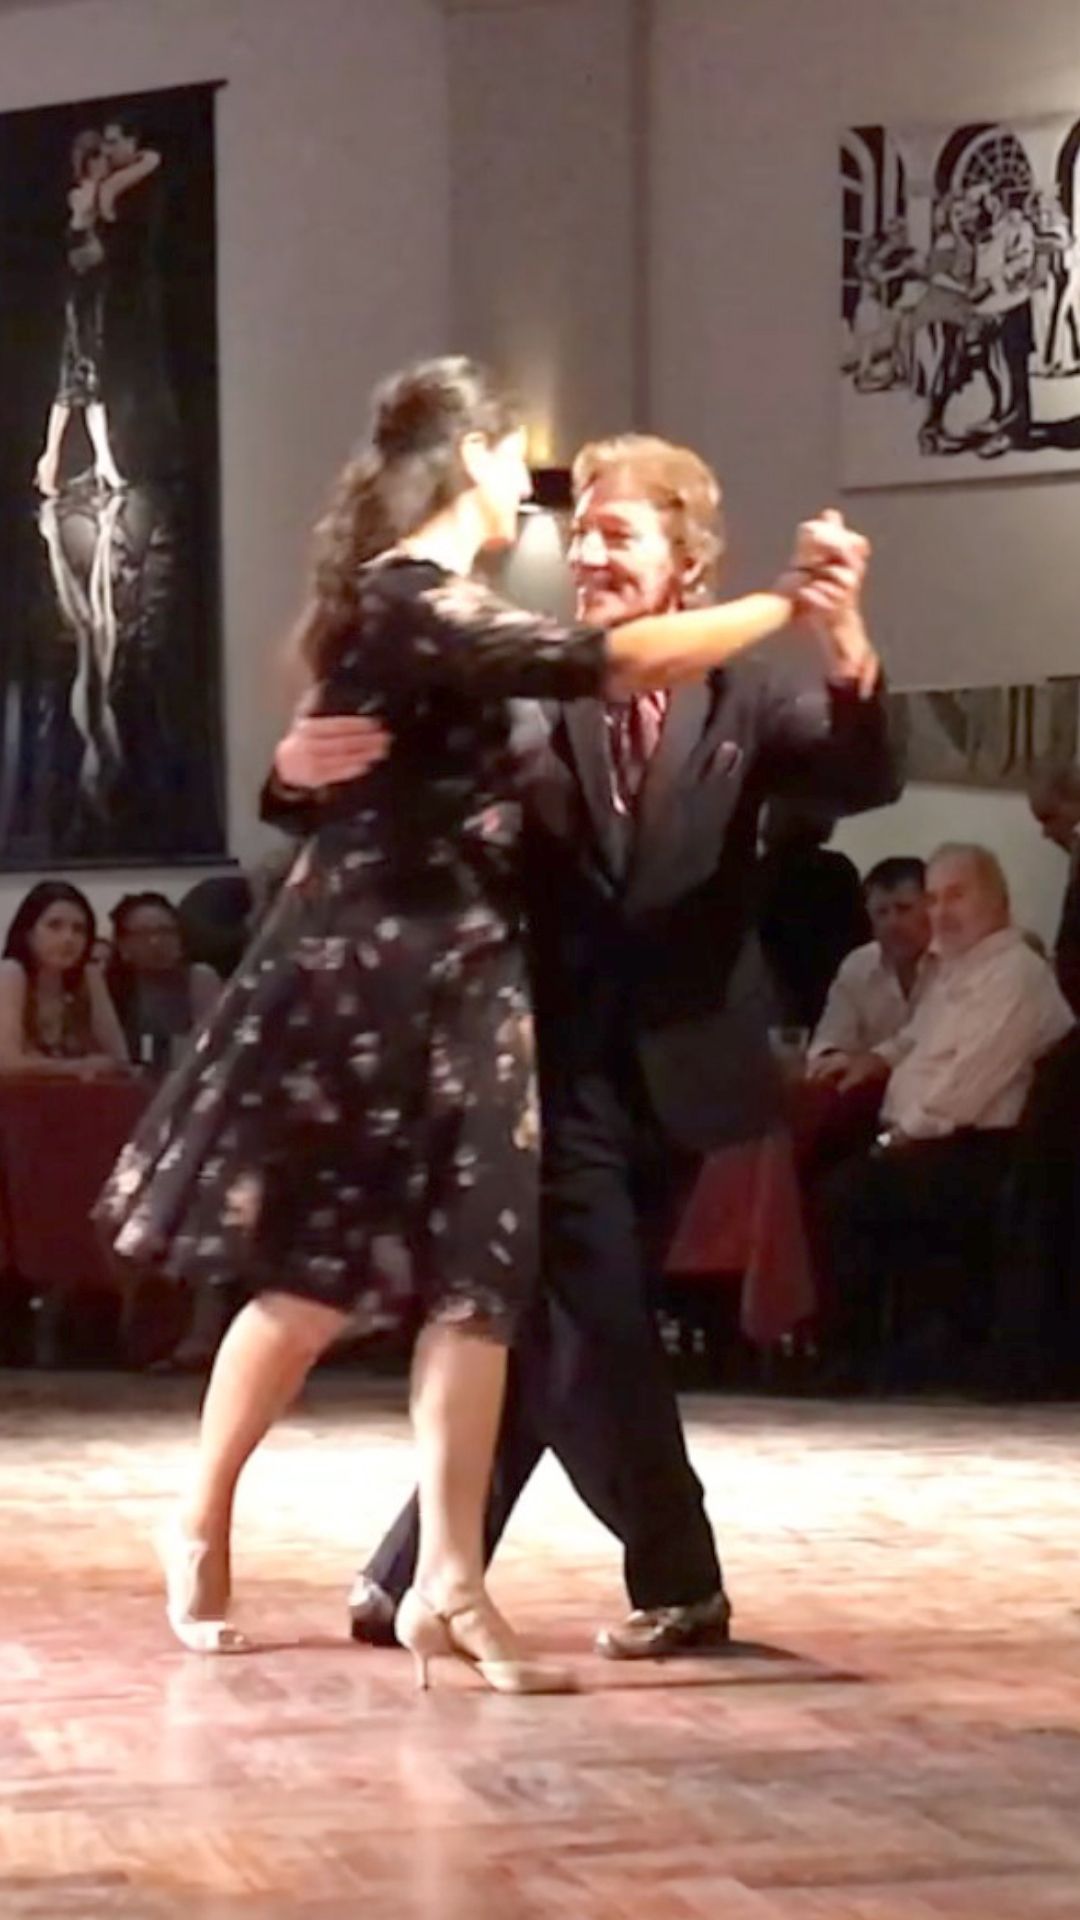 Argentine Tango dancing by Marcelo Solis and Mimi at Milonga Parakultural, Salón Canning, Buenos Aires, October 2022.